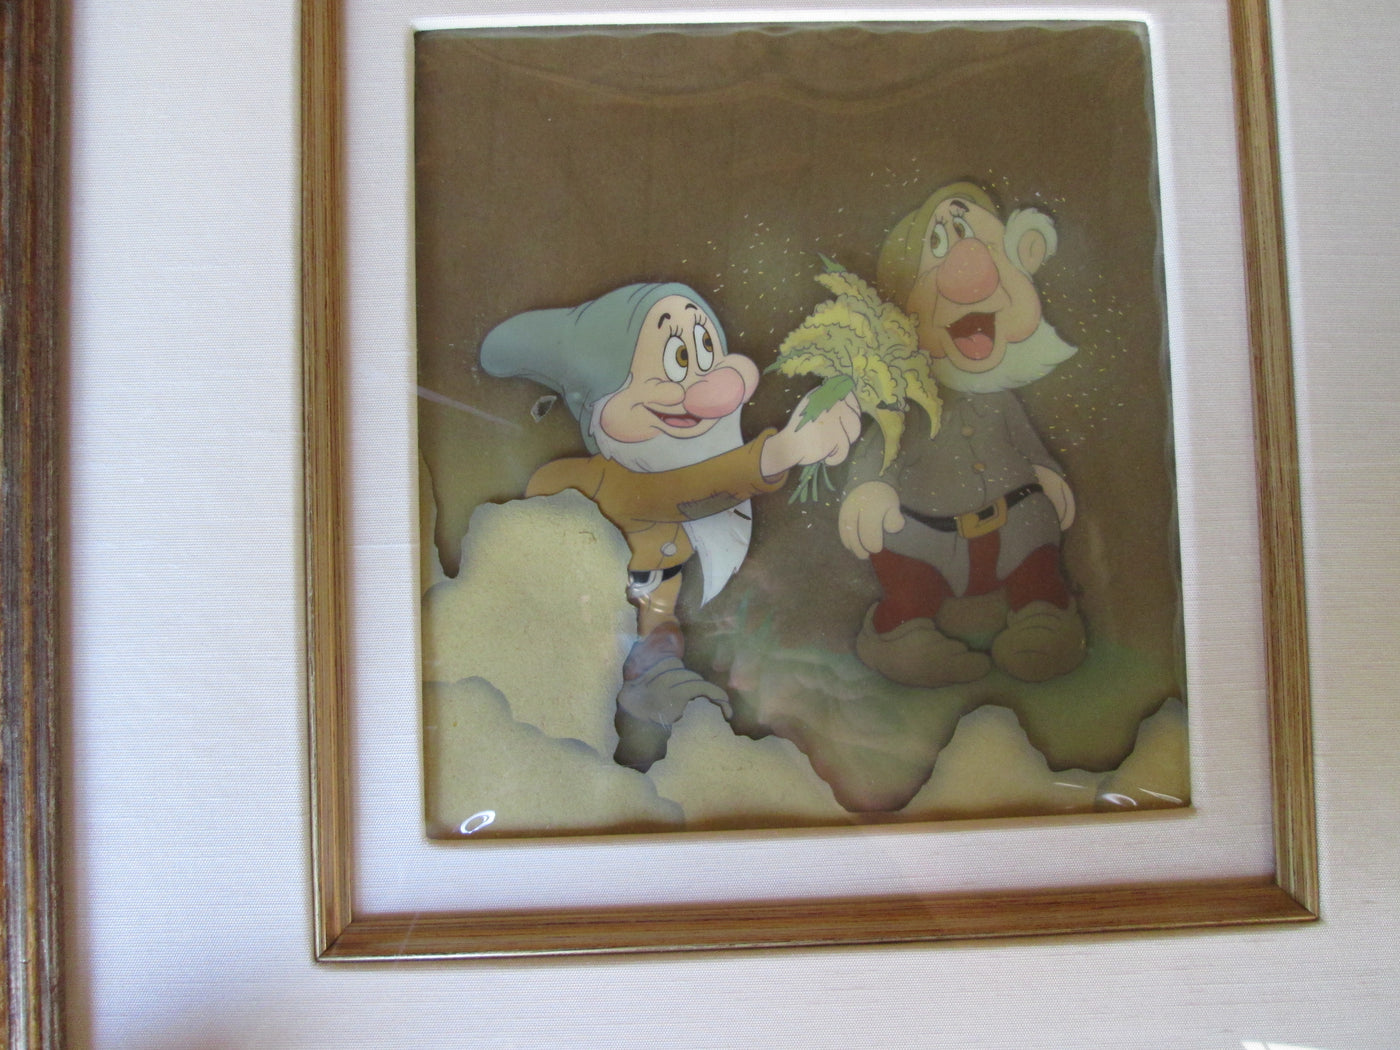 Original Walt Disney Production Cels on Courvoisier Background from Snow White and the Seven Dwarfs featuring Sneezy and Bashful